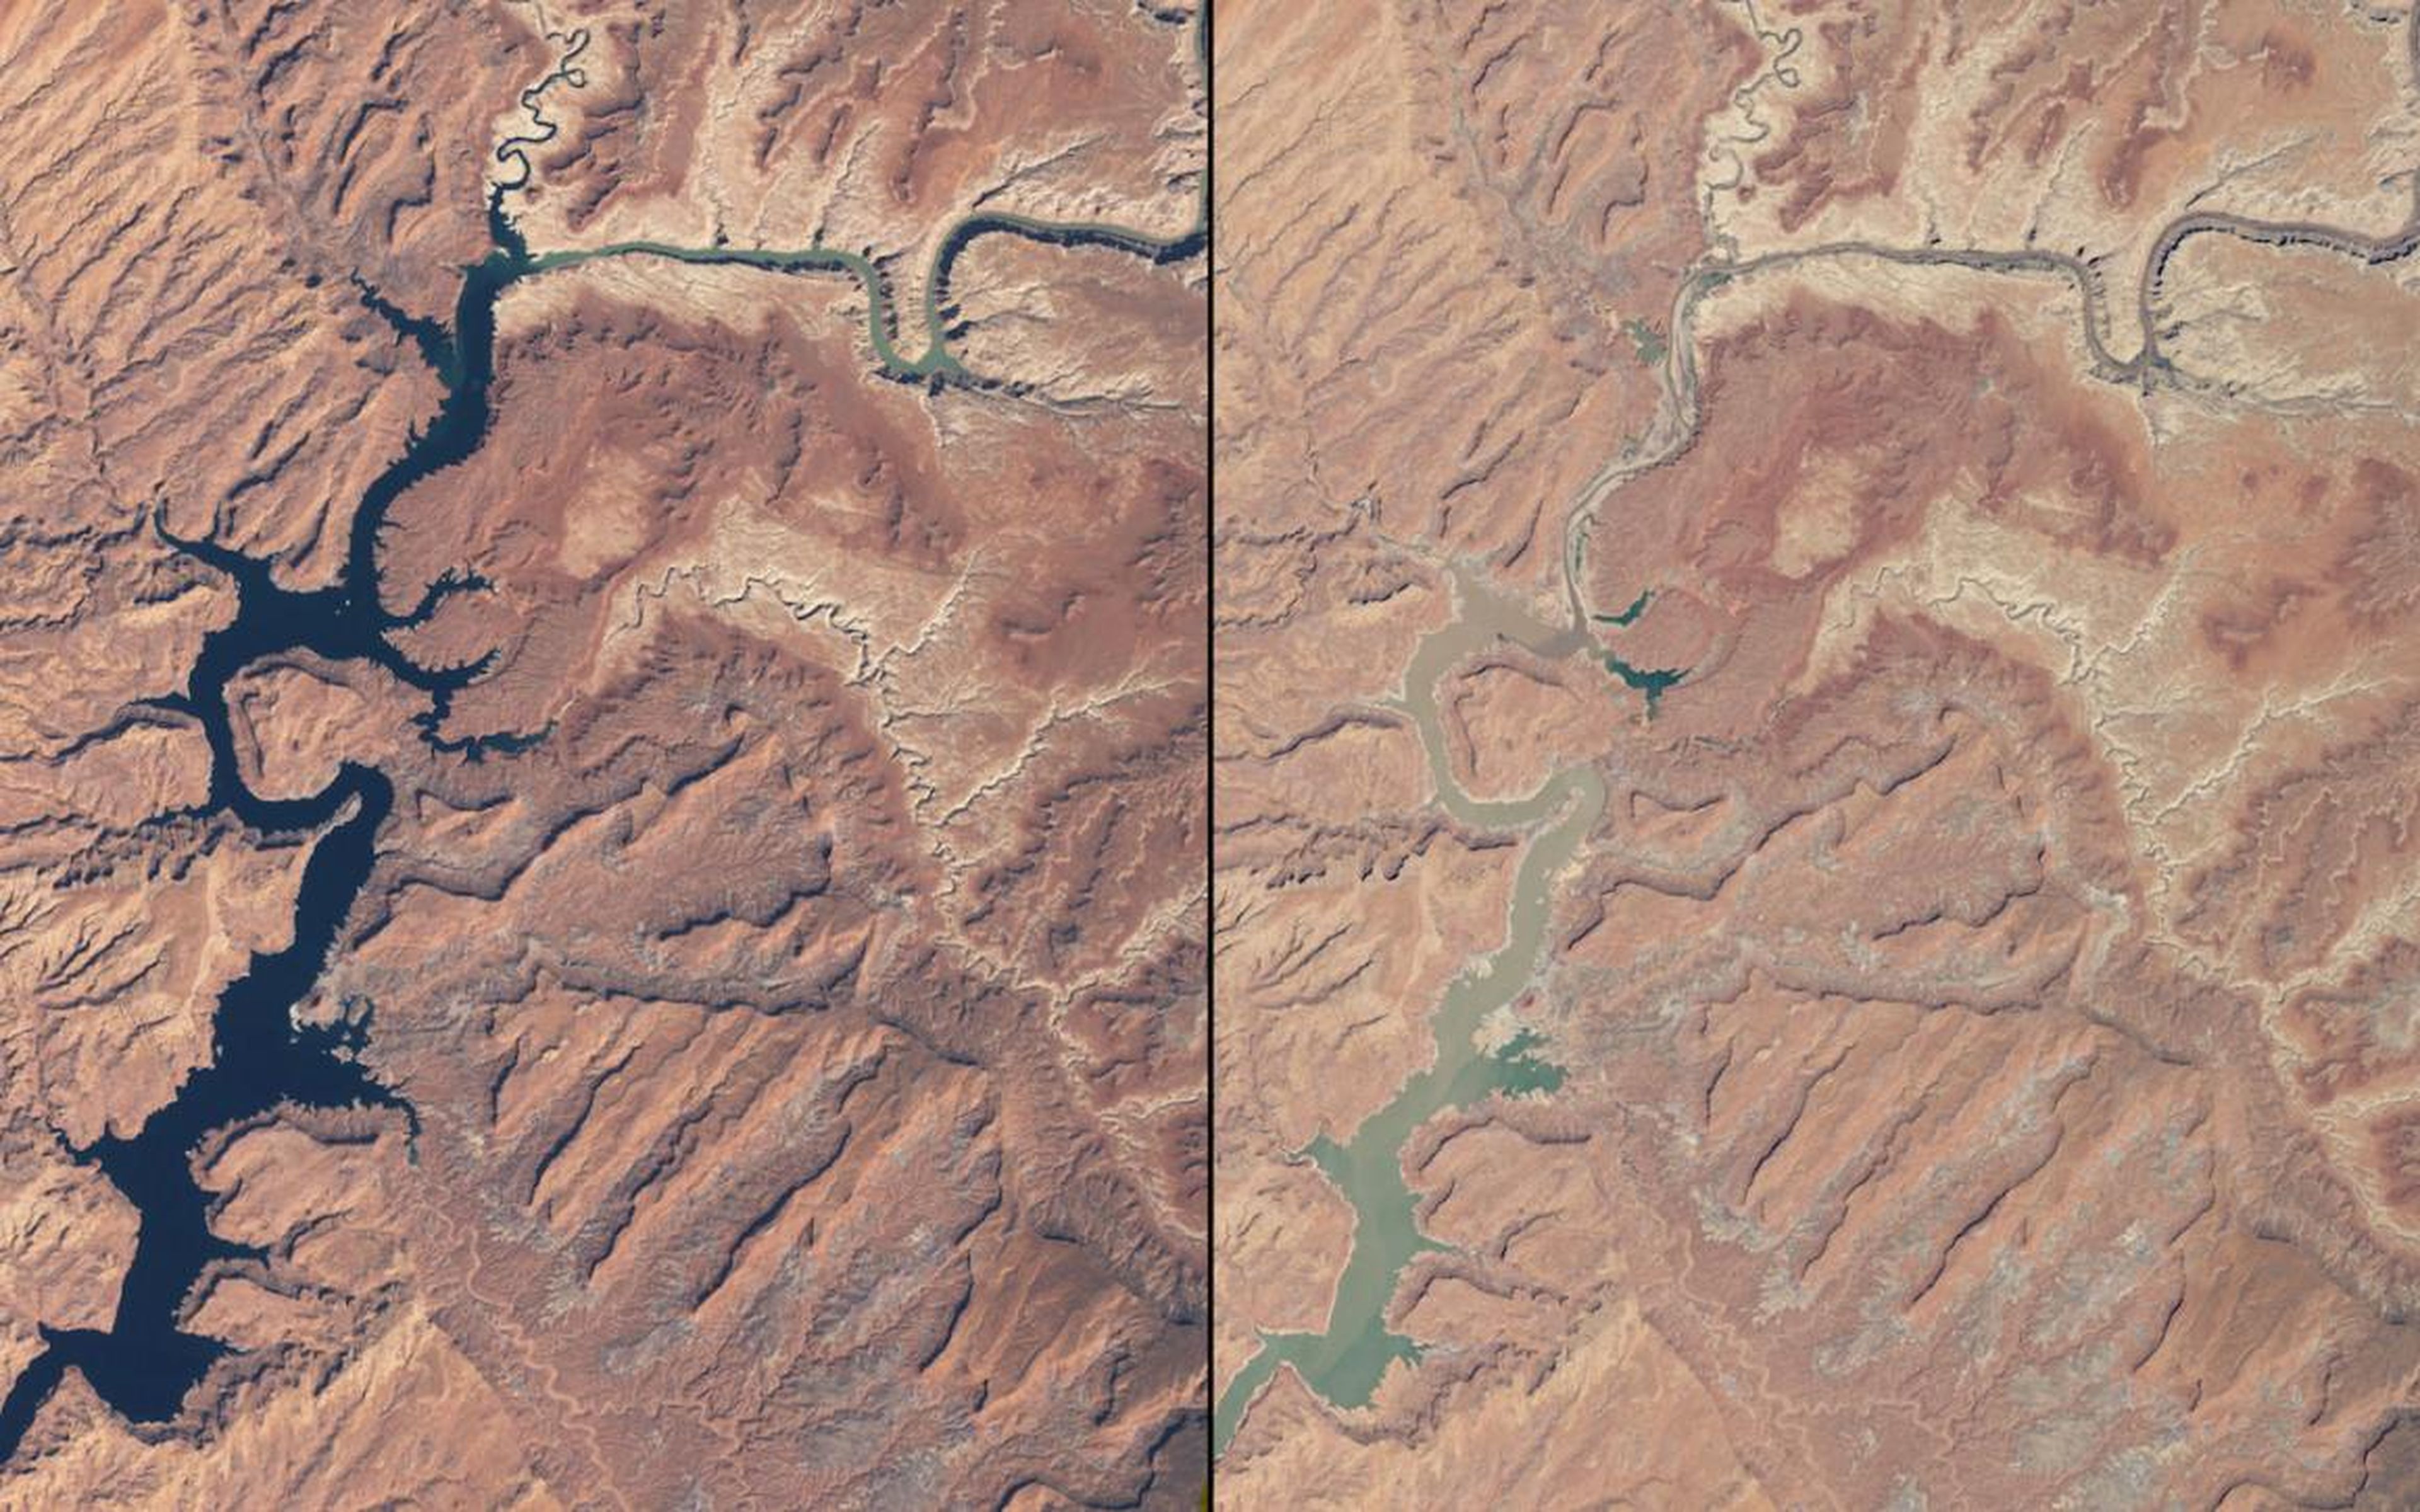 Some rivers have been shrinking as well — these images compare waterways in Arizona and Utah in March 1999 (left) and May 2014 (right).